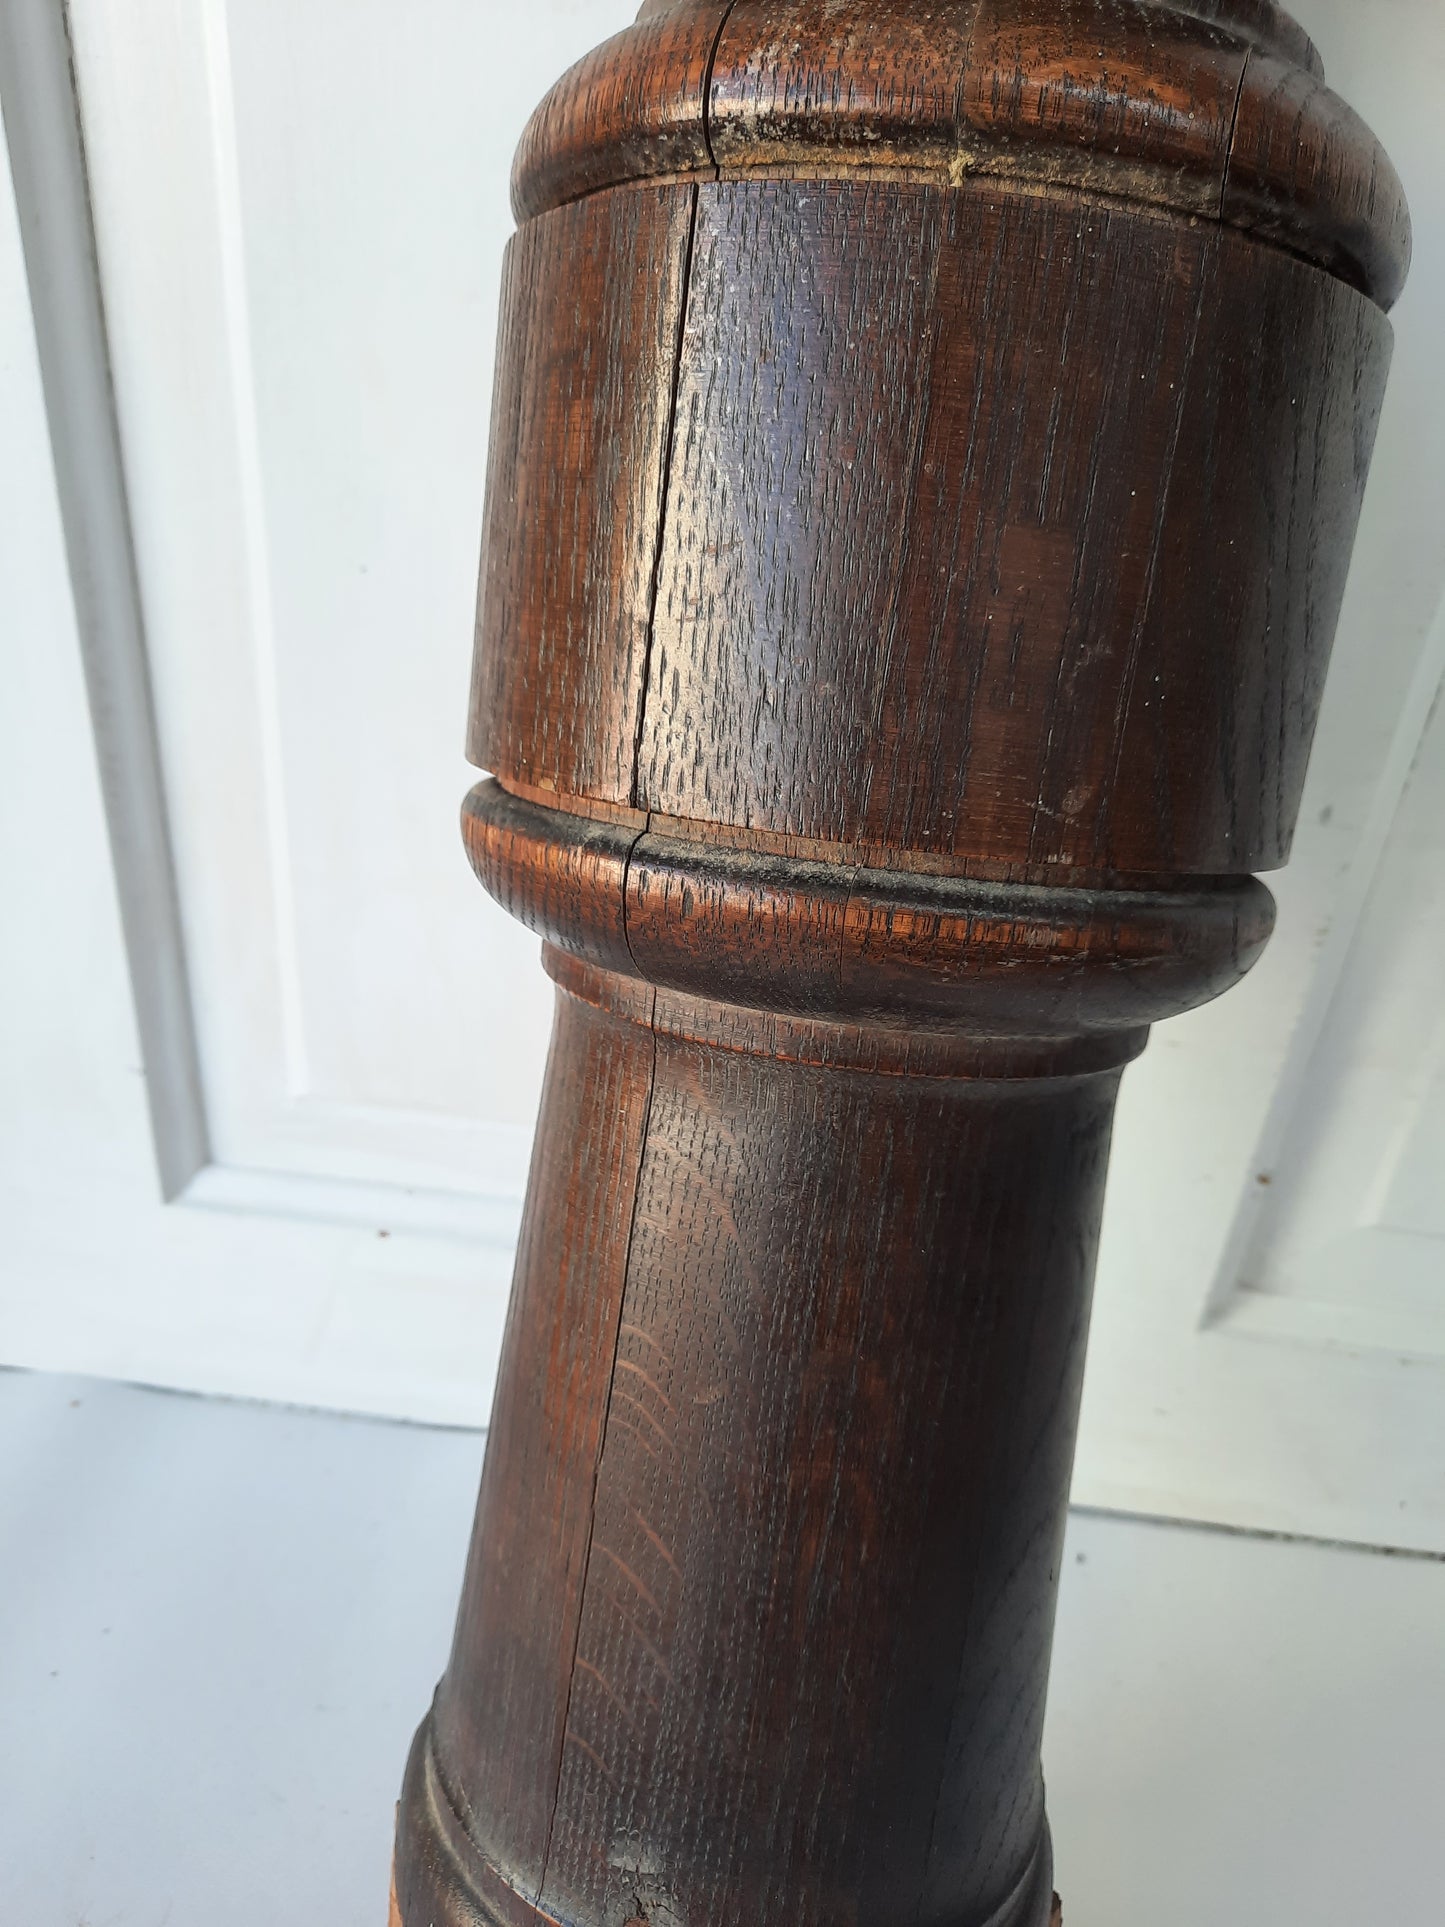 Large Antique Turned Newel Post Topper, Wood Newel Post Finial Top